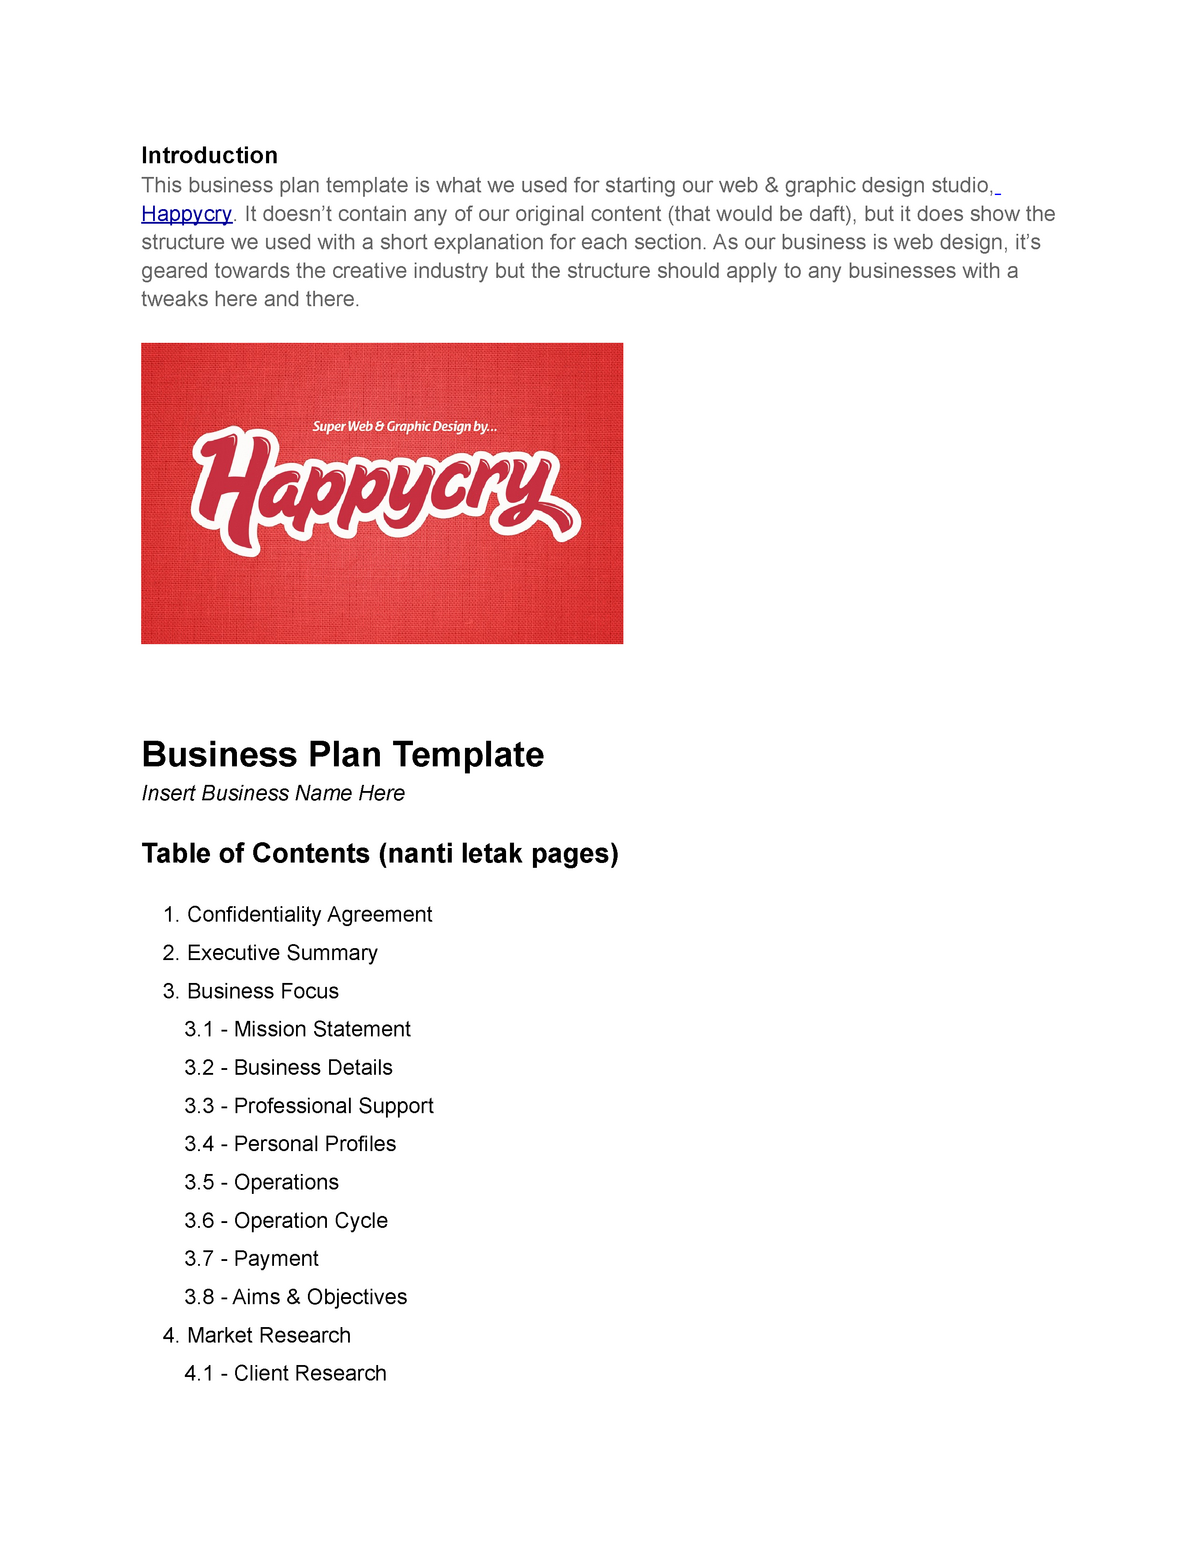 examples of introduction of business plan